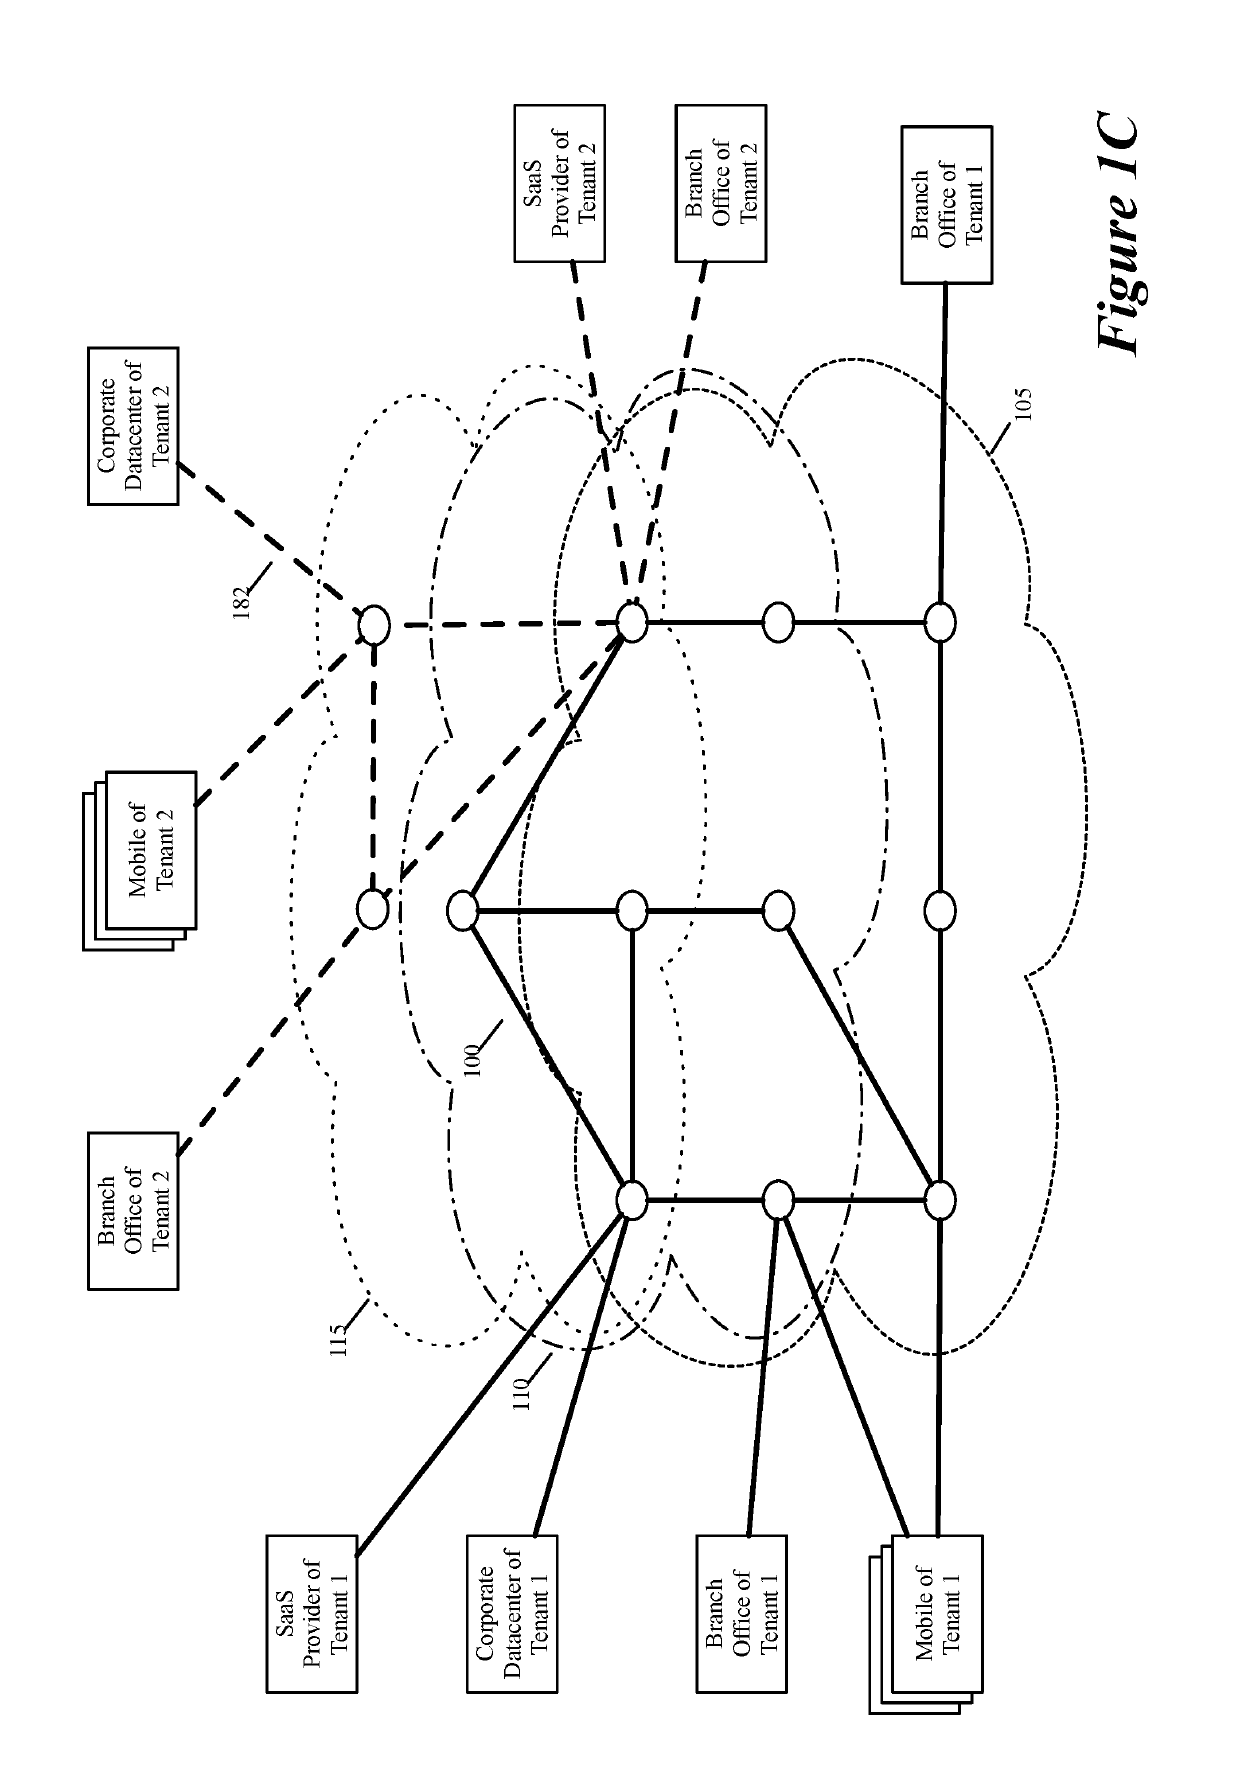 Processing data messages of a virtual network that are sent to and received from external service machines